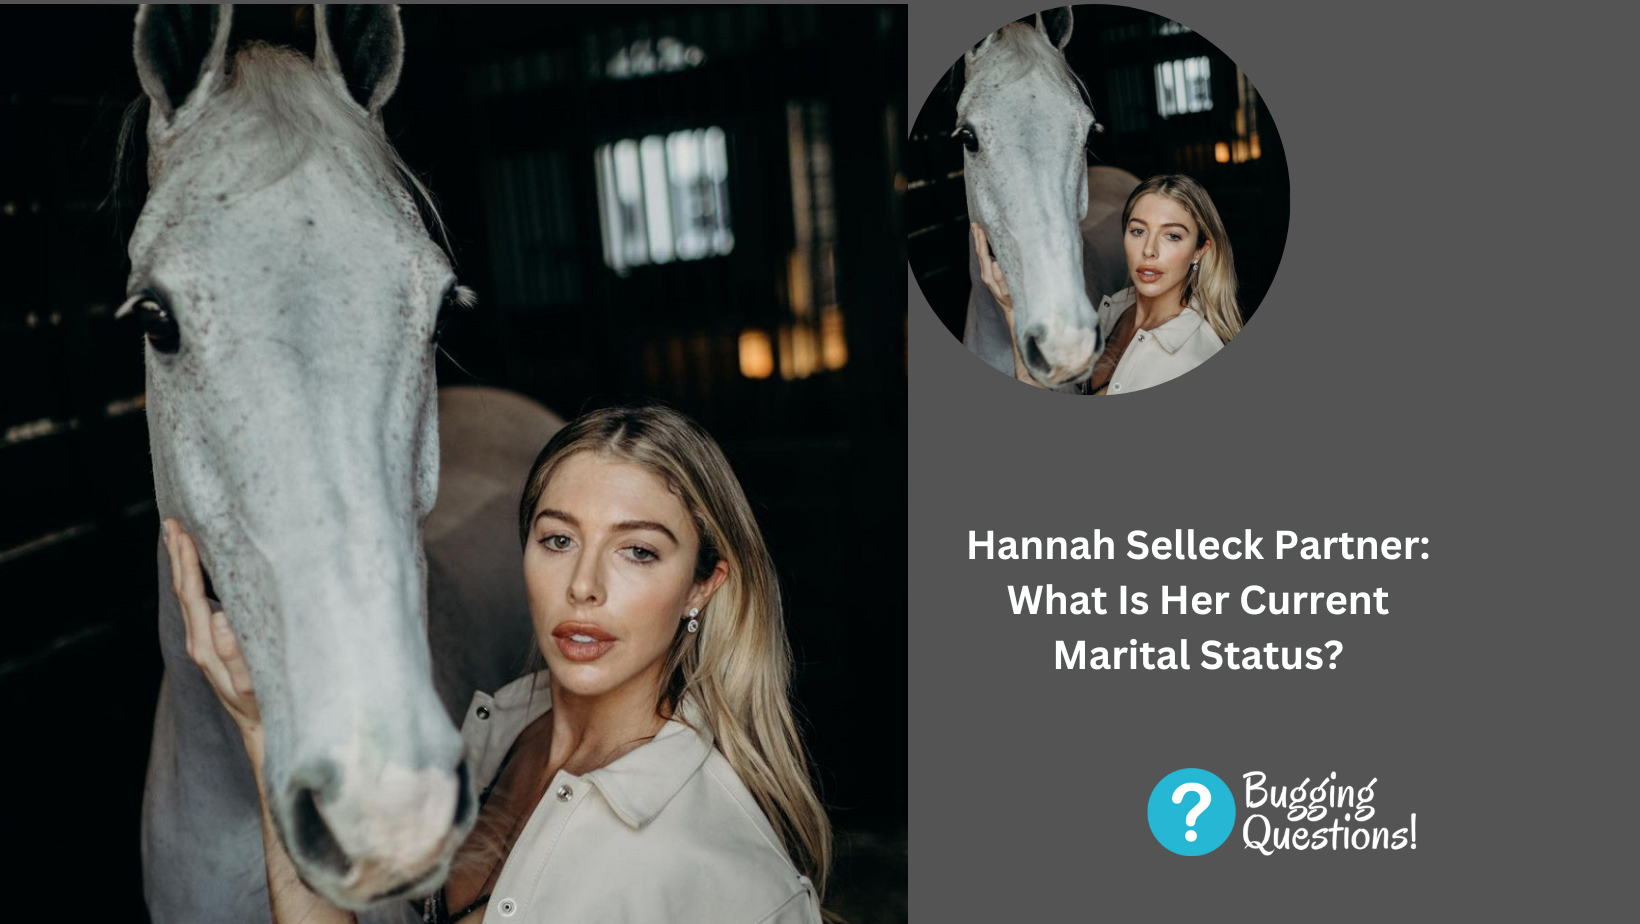 Hannah Selleck Partner: What Is Her Current Marital Status?